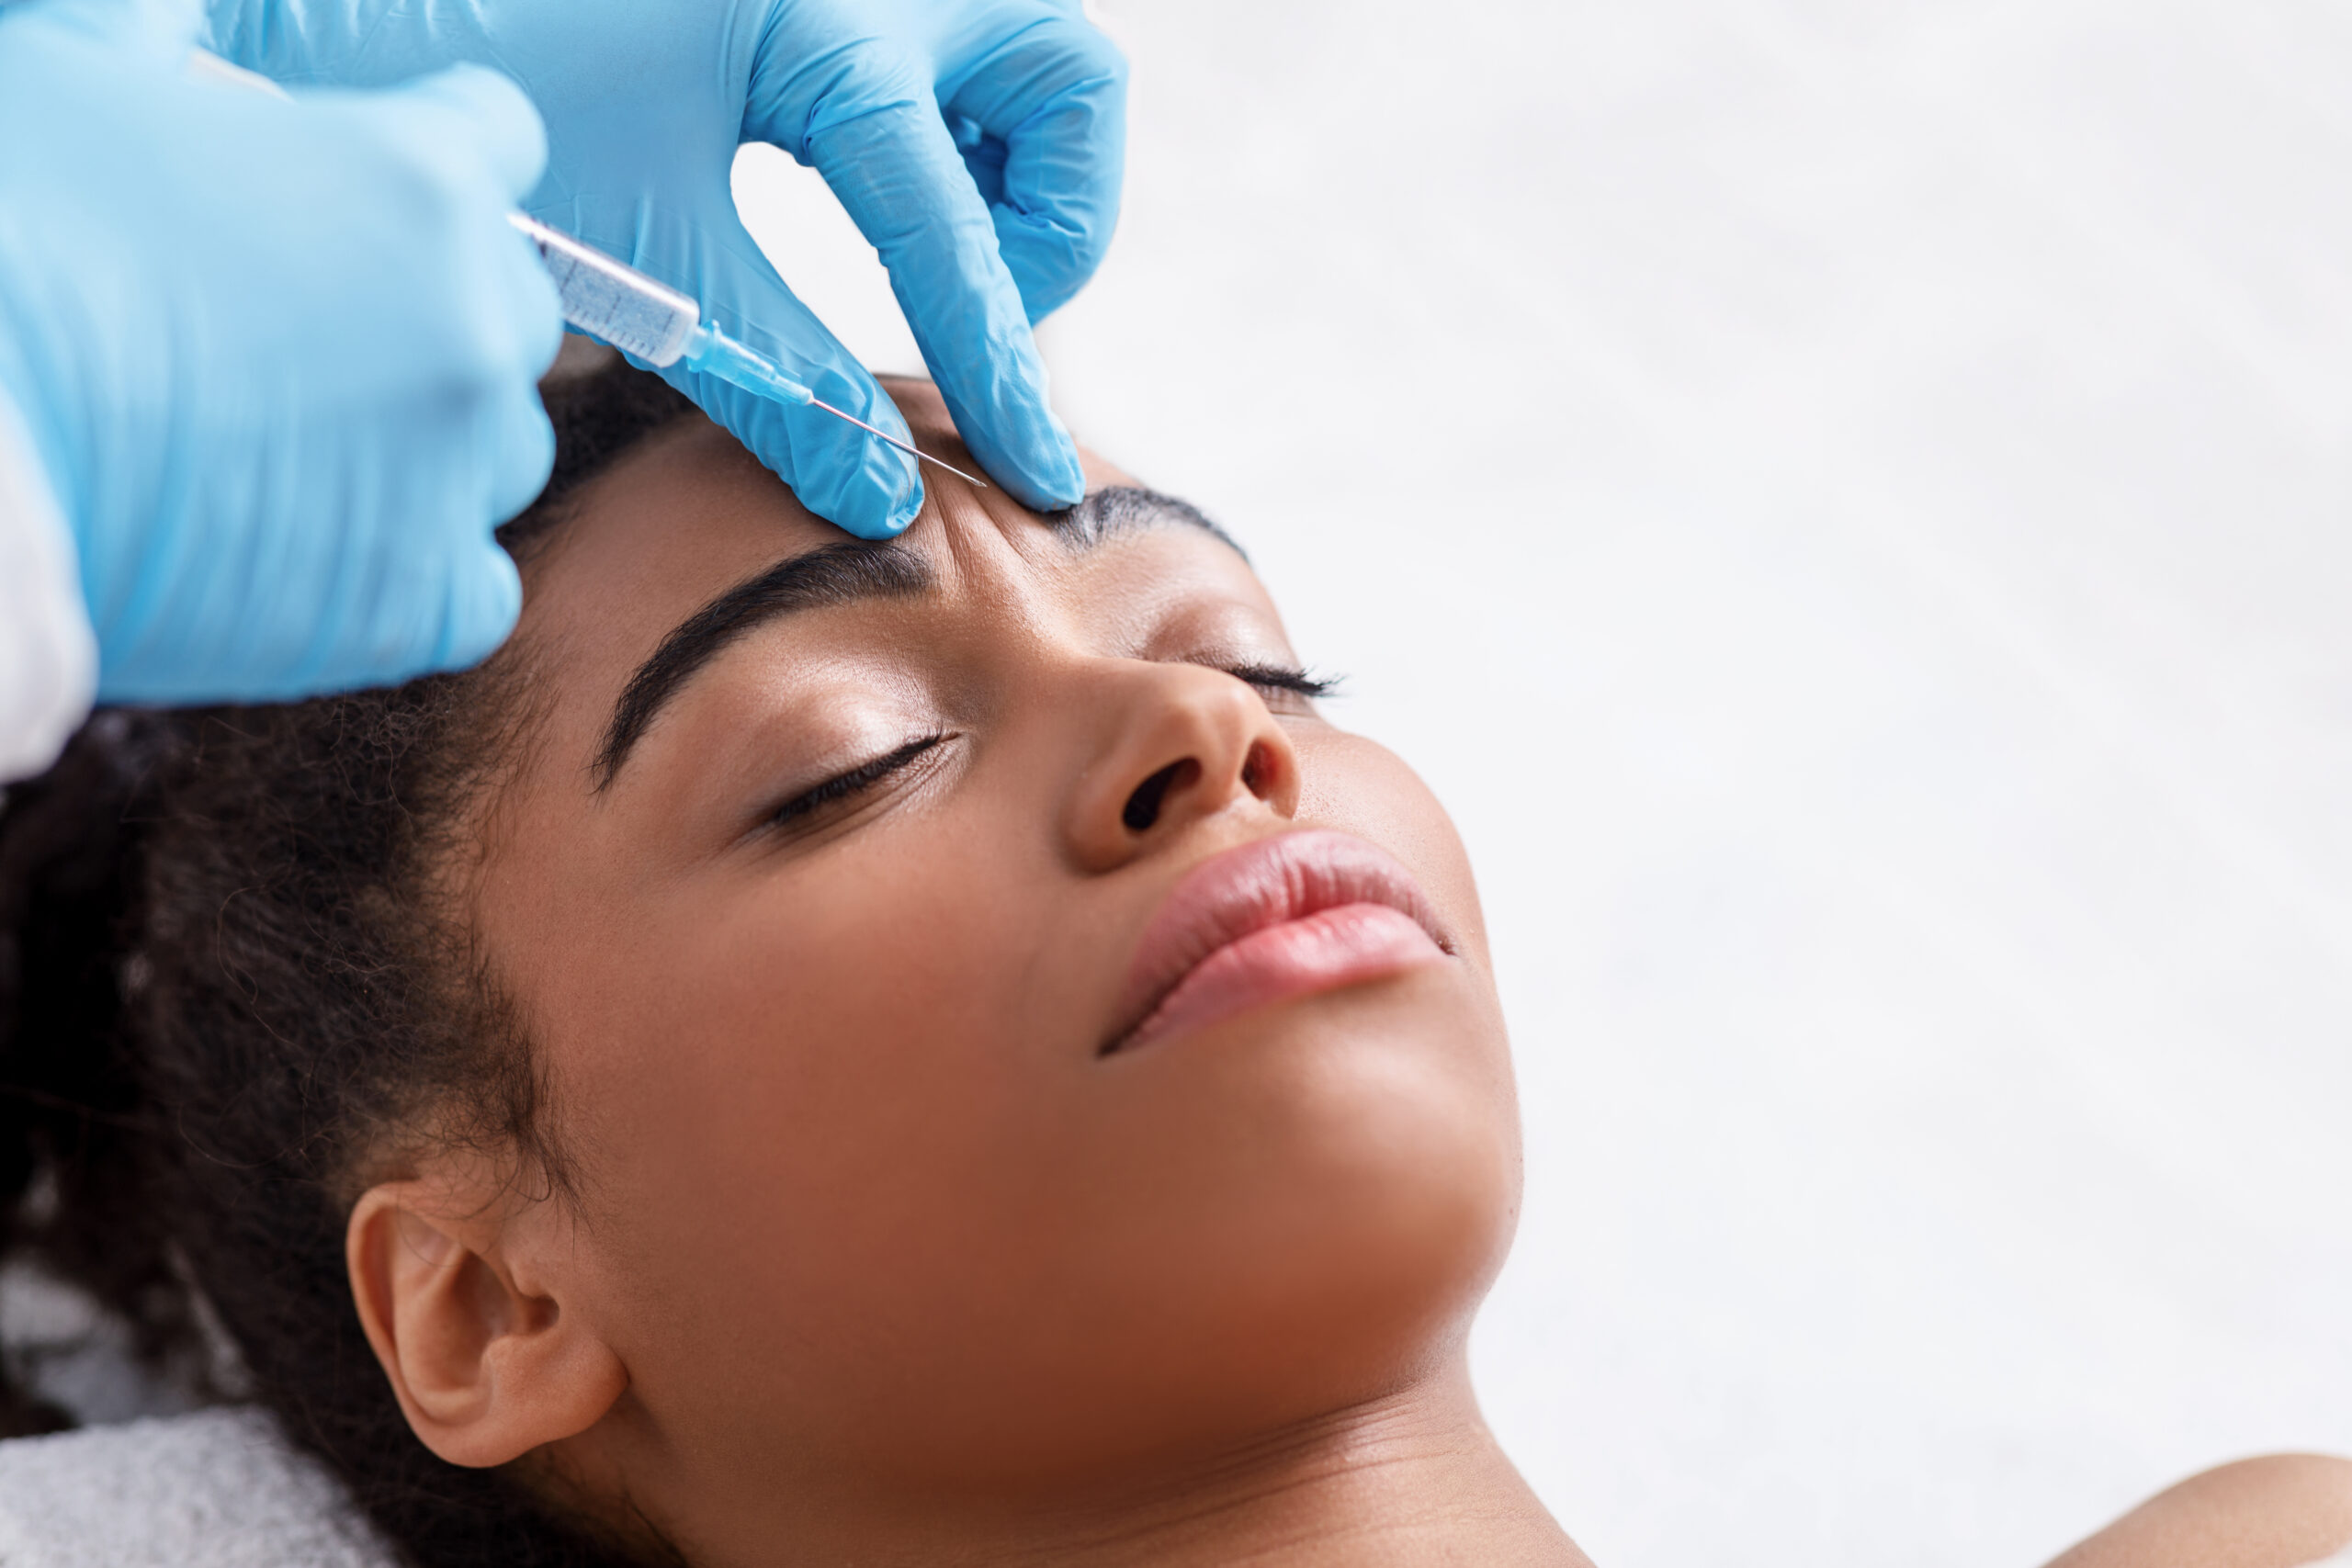 Injectable fillers like Botox® and Juvederm® offered at Collab MedSpa Scottsdale